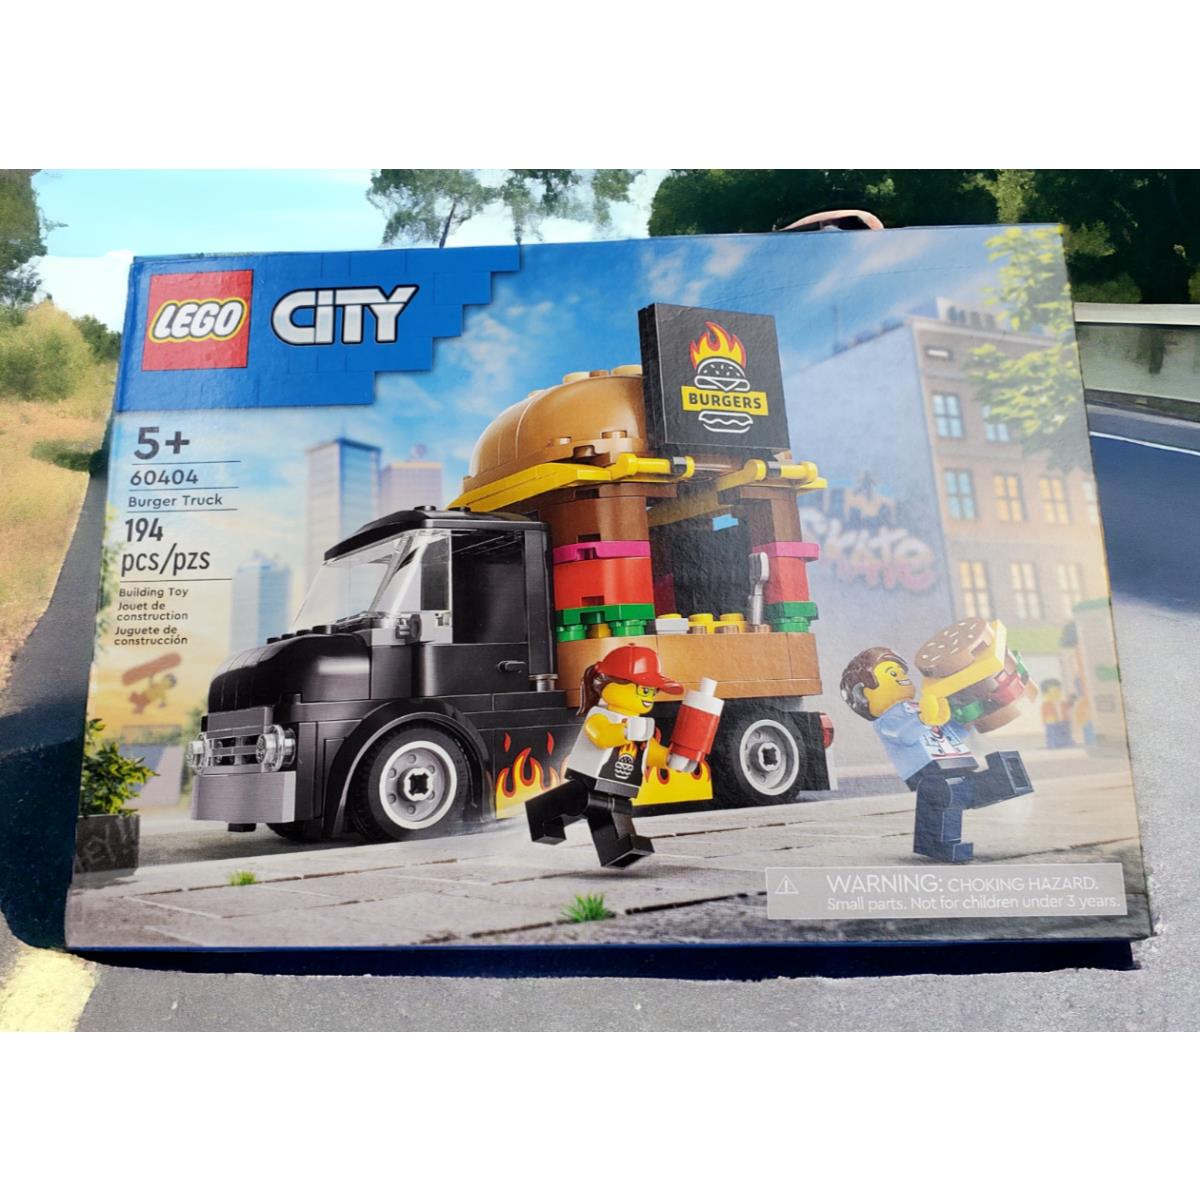 Lego 60404 Flame Grilled City Burger Truck Toy Building Set 194 Pieces